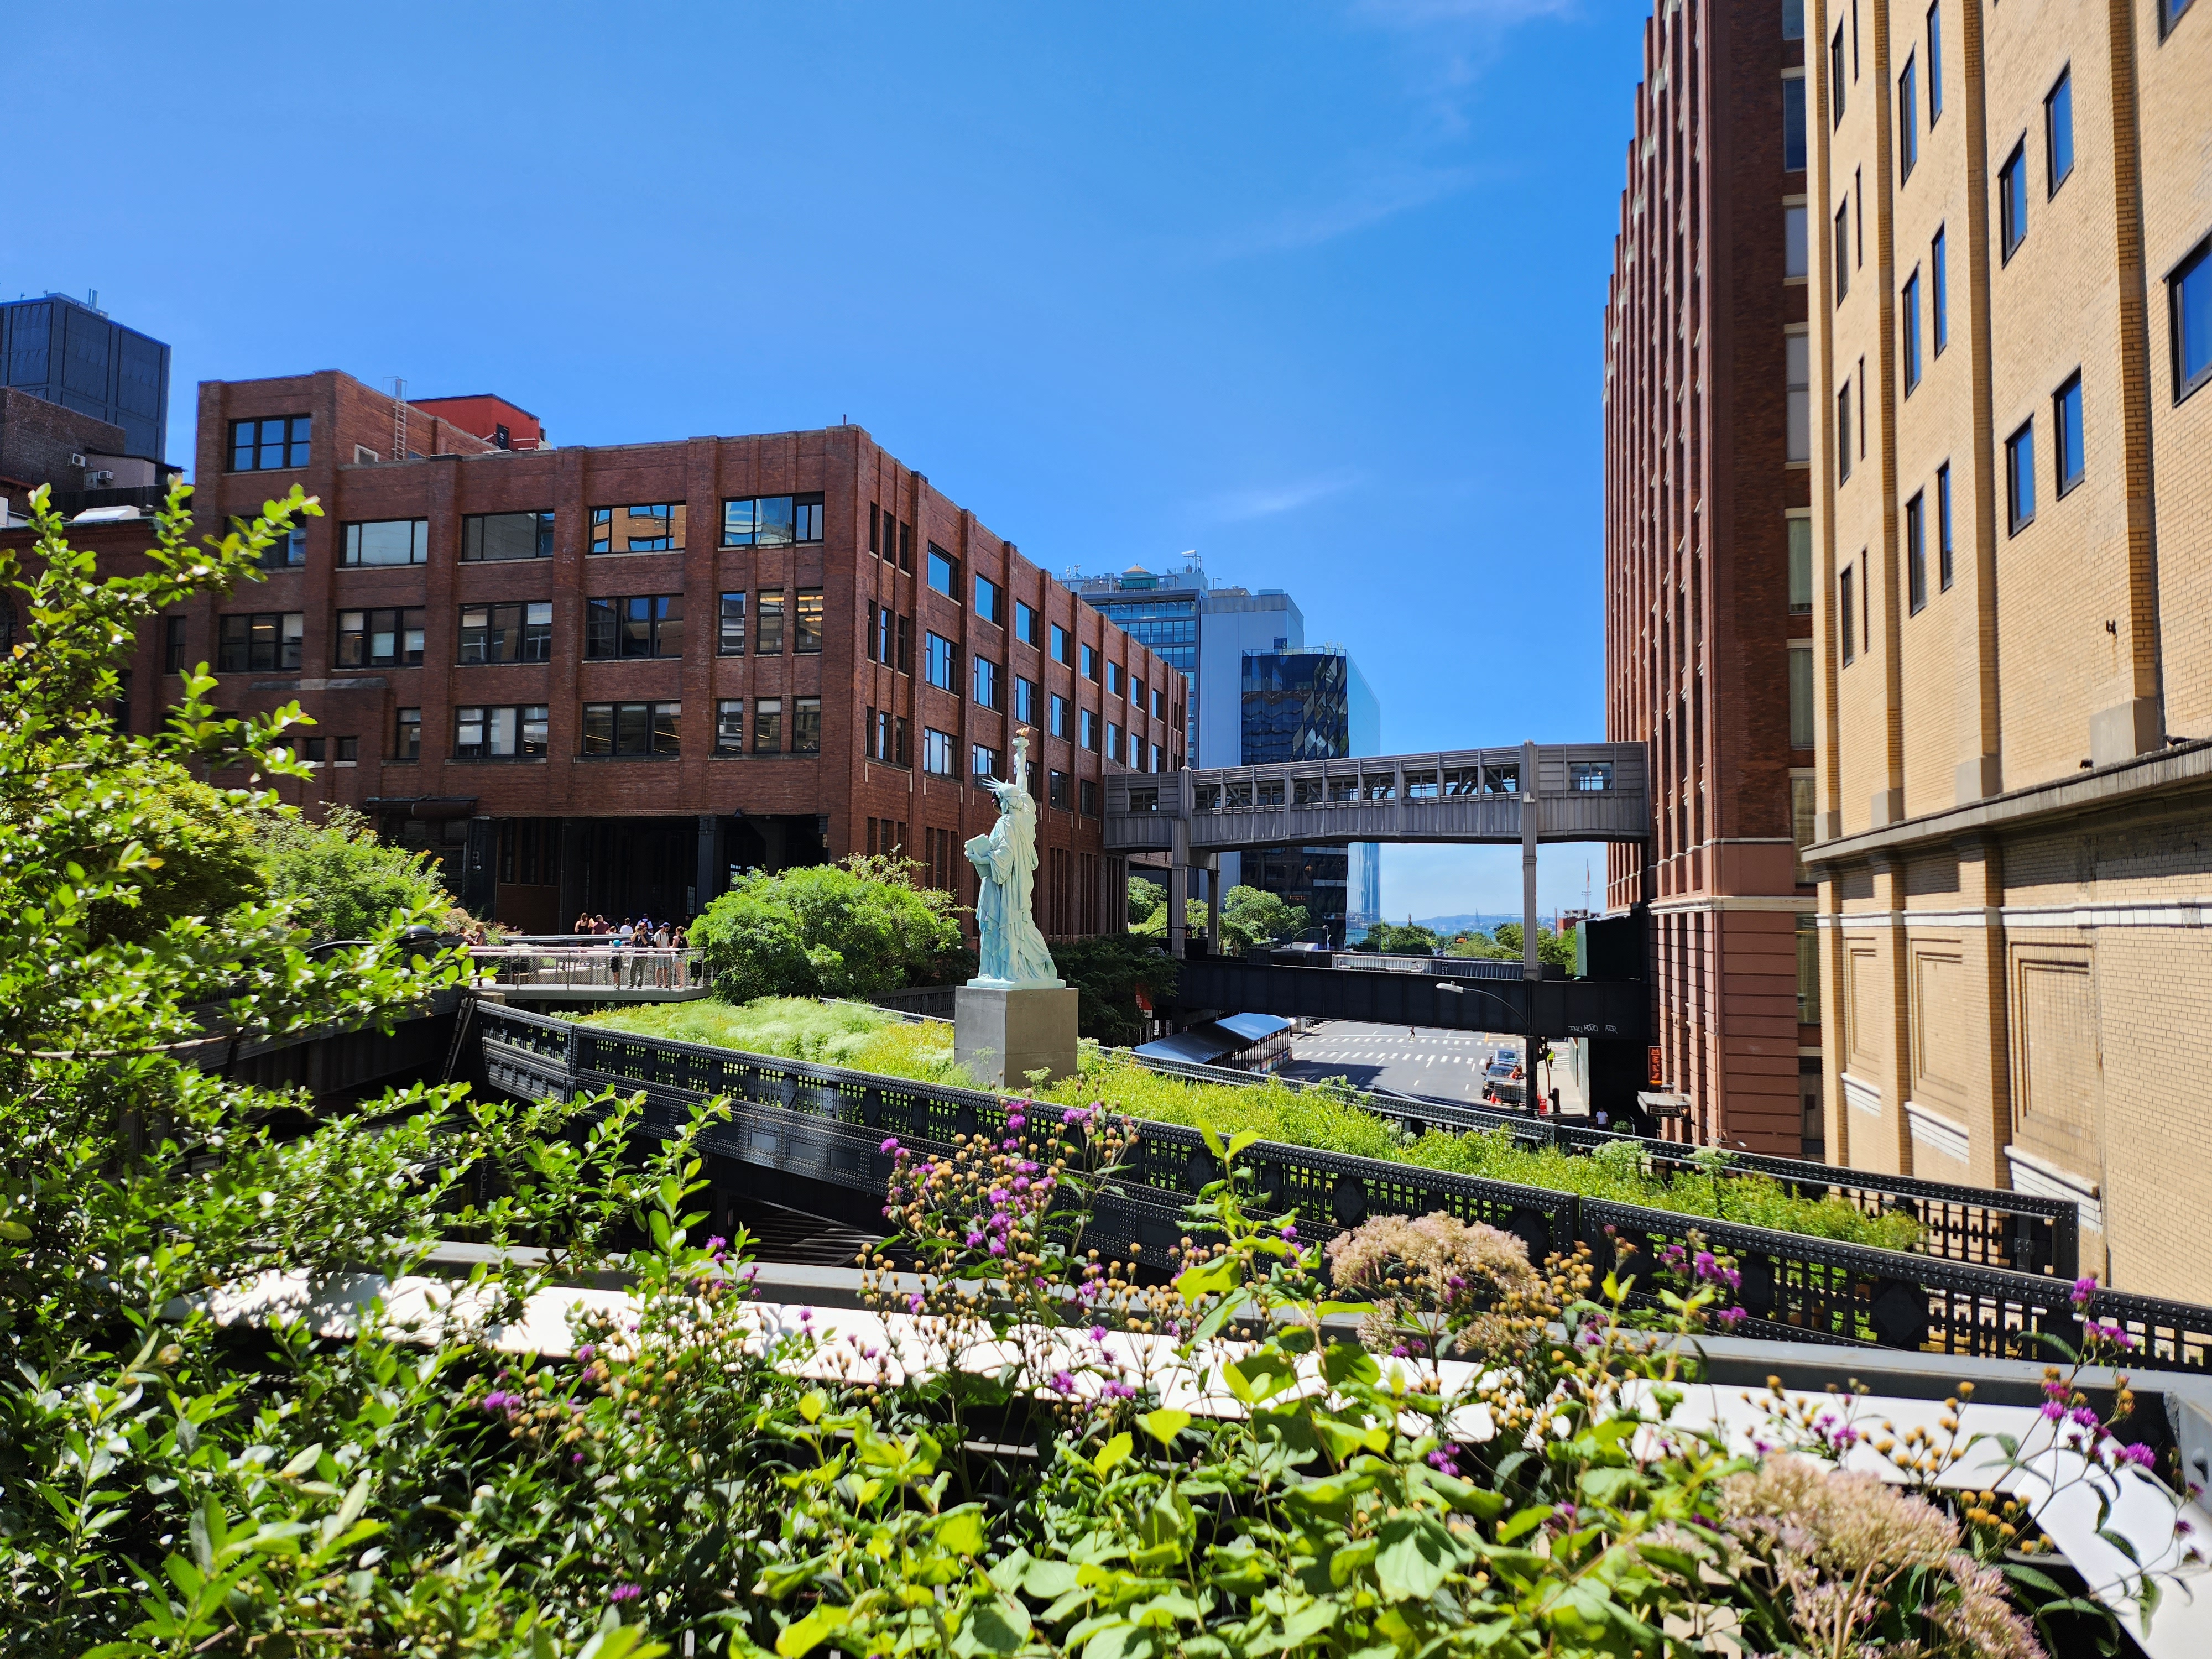 Photo from the High Line in New York City.